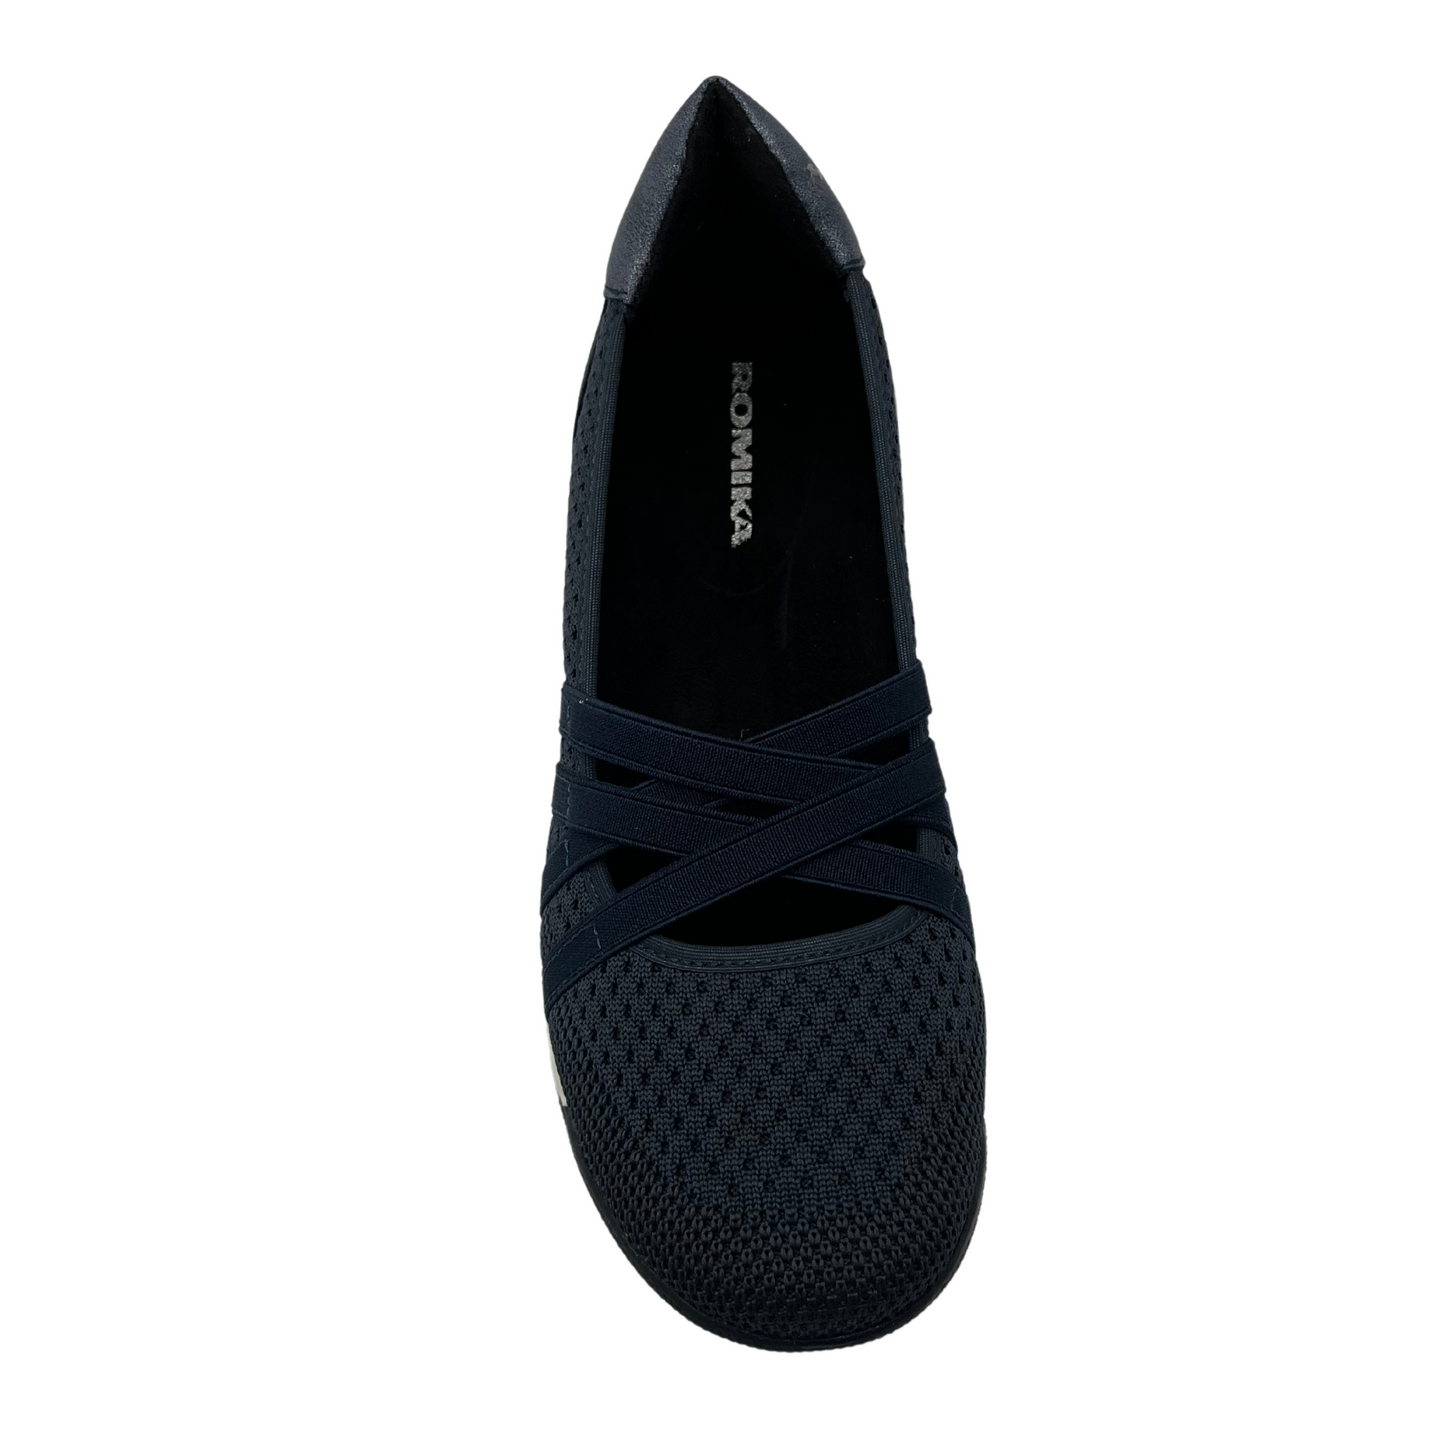 Top view of navy mesh flat with criss-cross straps and rounded toe